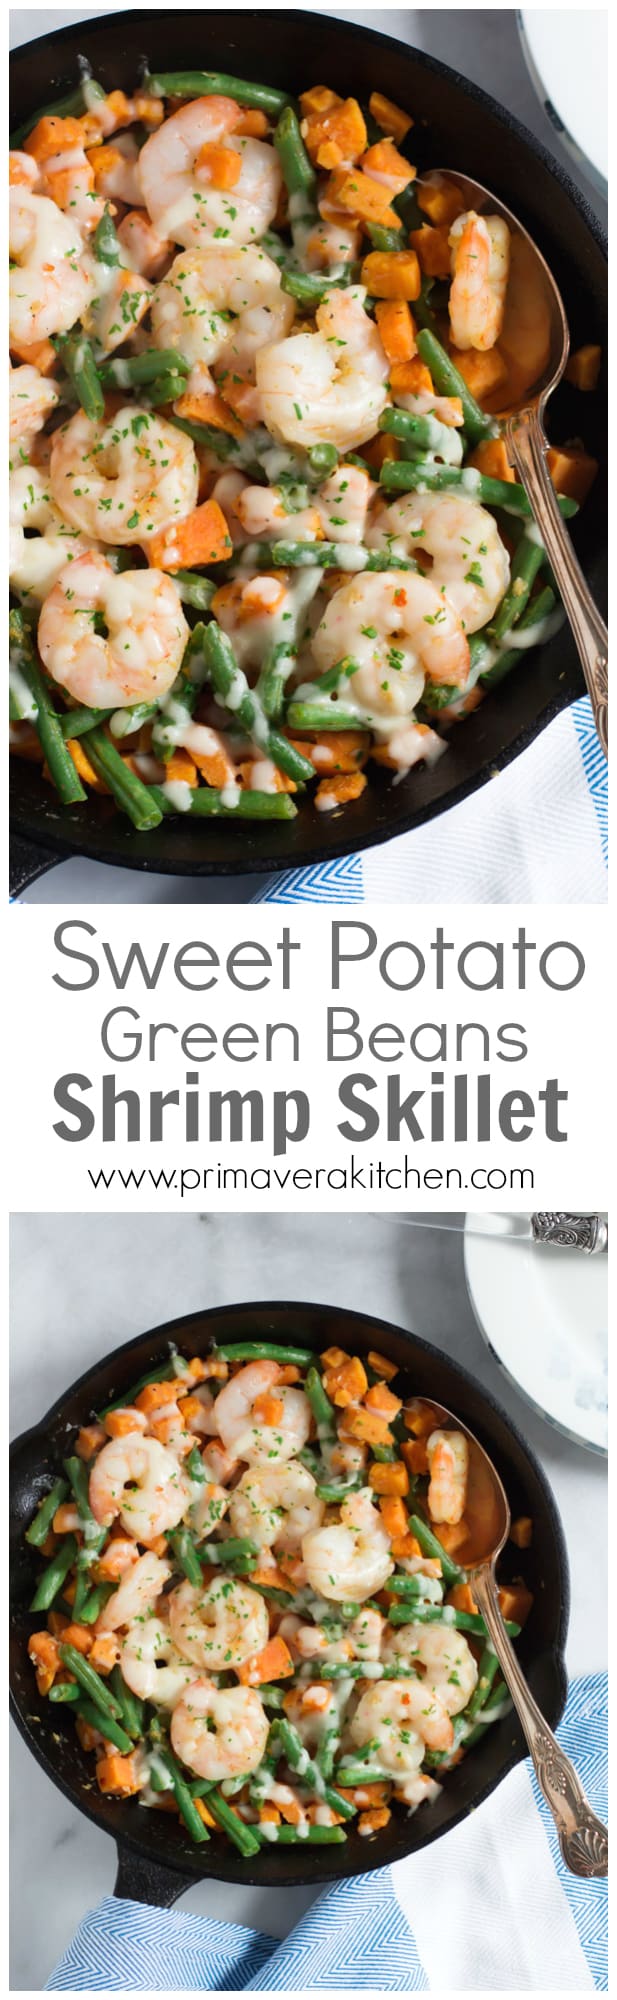 Shrimp Skillet with Sweet Potato and Green Beans - This Shrimp Skillet is made with sweet potato and green beans, which uses only one pot and it is done in less than 30mins.